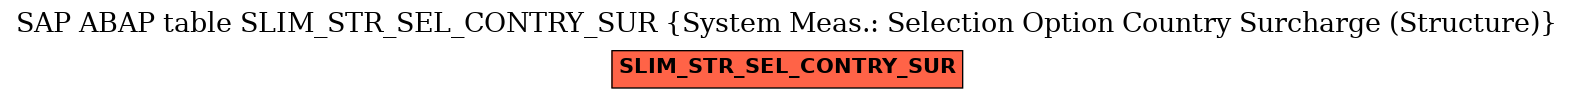 E-R Diagram for table SLIM_STR_SEL_CONTRY_SUR (System Meas.: Selection Option Country Surcharge (Structure))